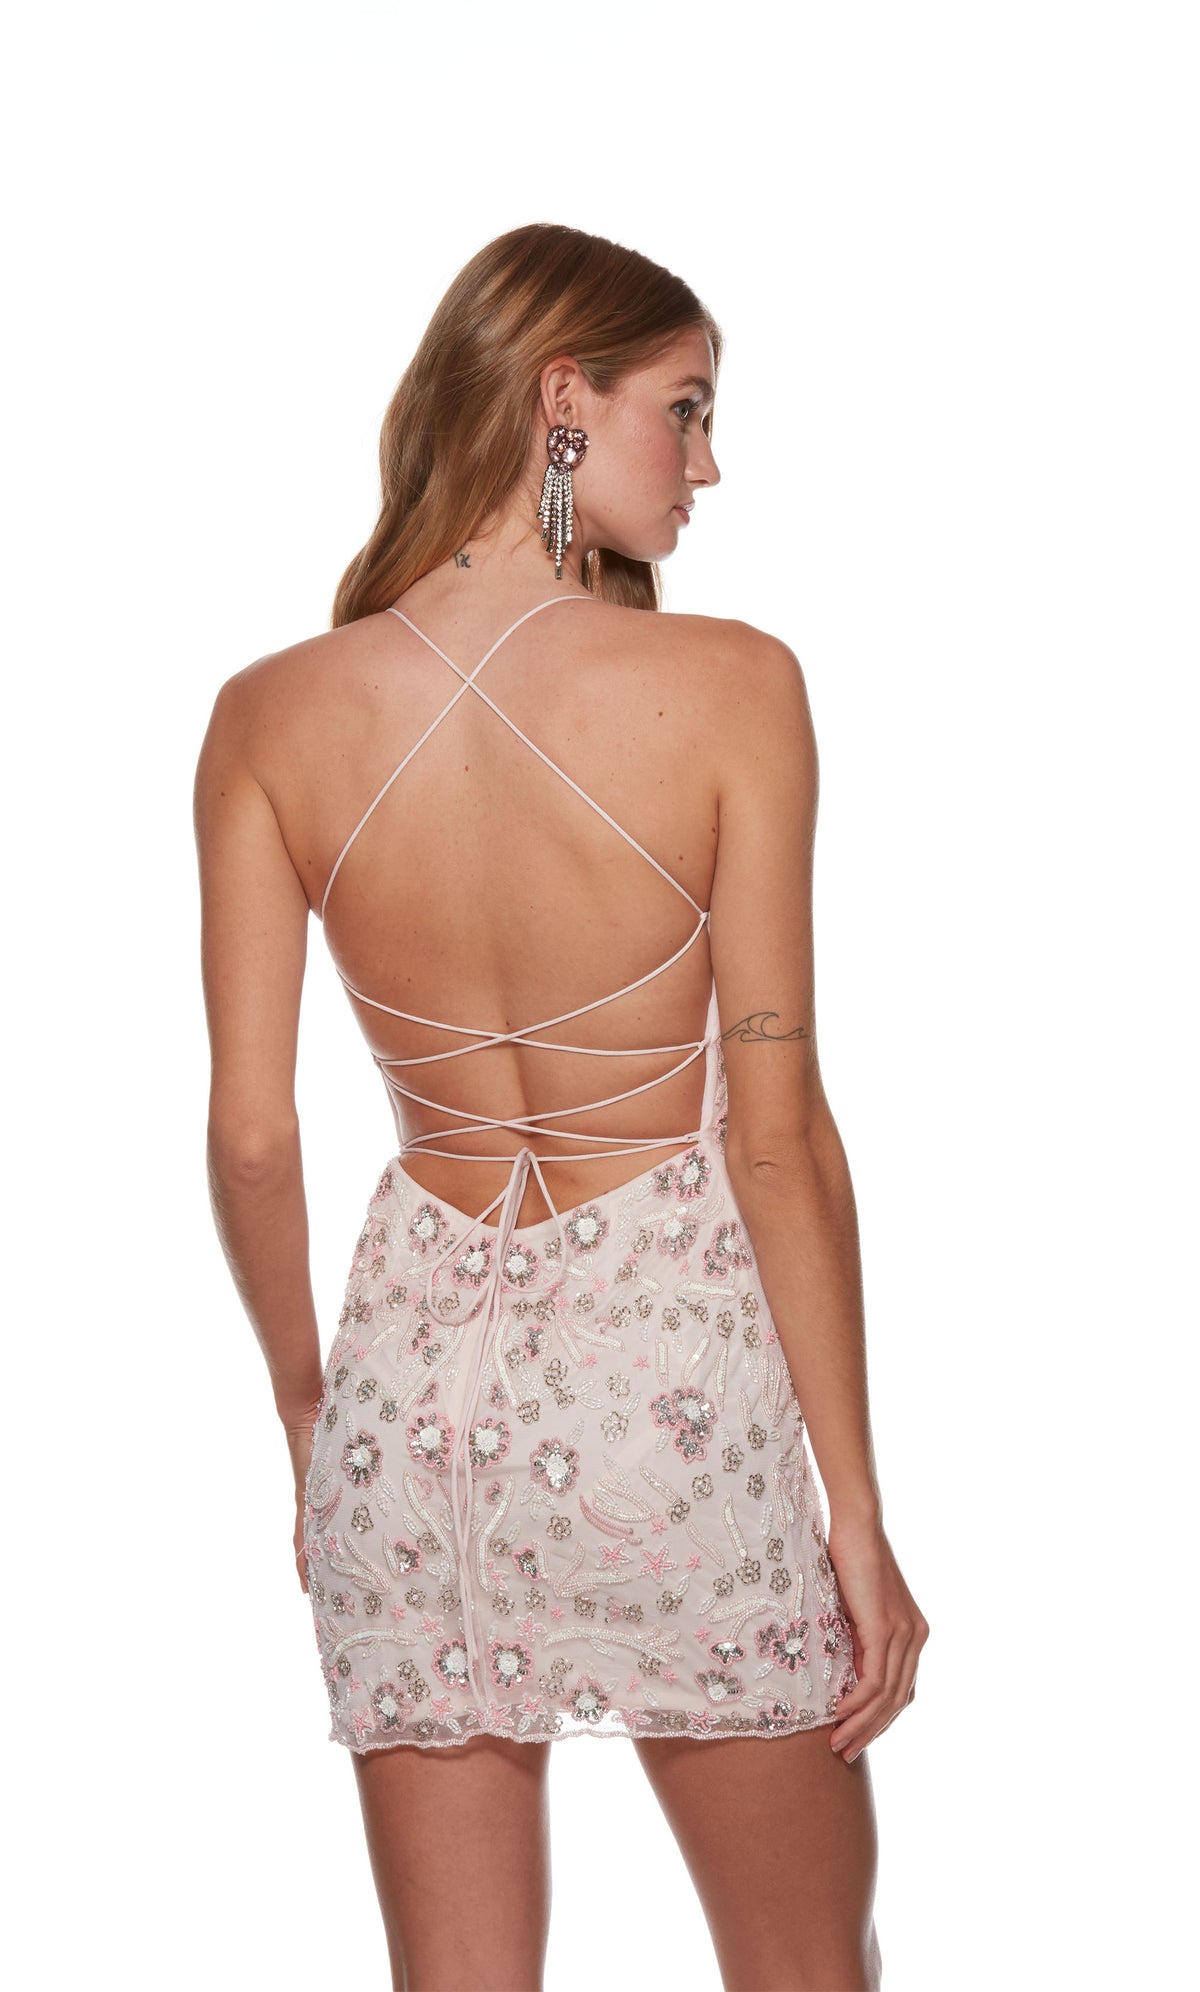 A rosewater pink V-neck short homecoming dress beautifully hand beaded in a boho floral pattern, crafted from pink, silver, and white beads. The back of the dress has a thin strap lace-up closure for a custom fit.